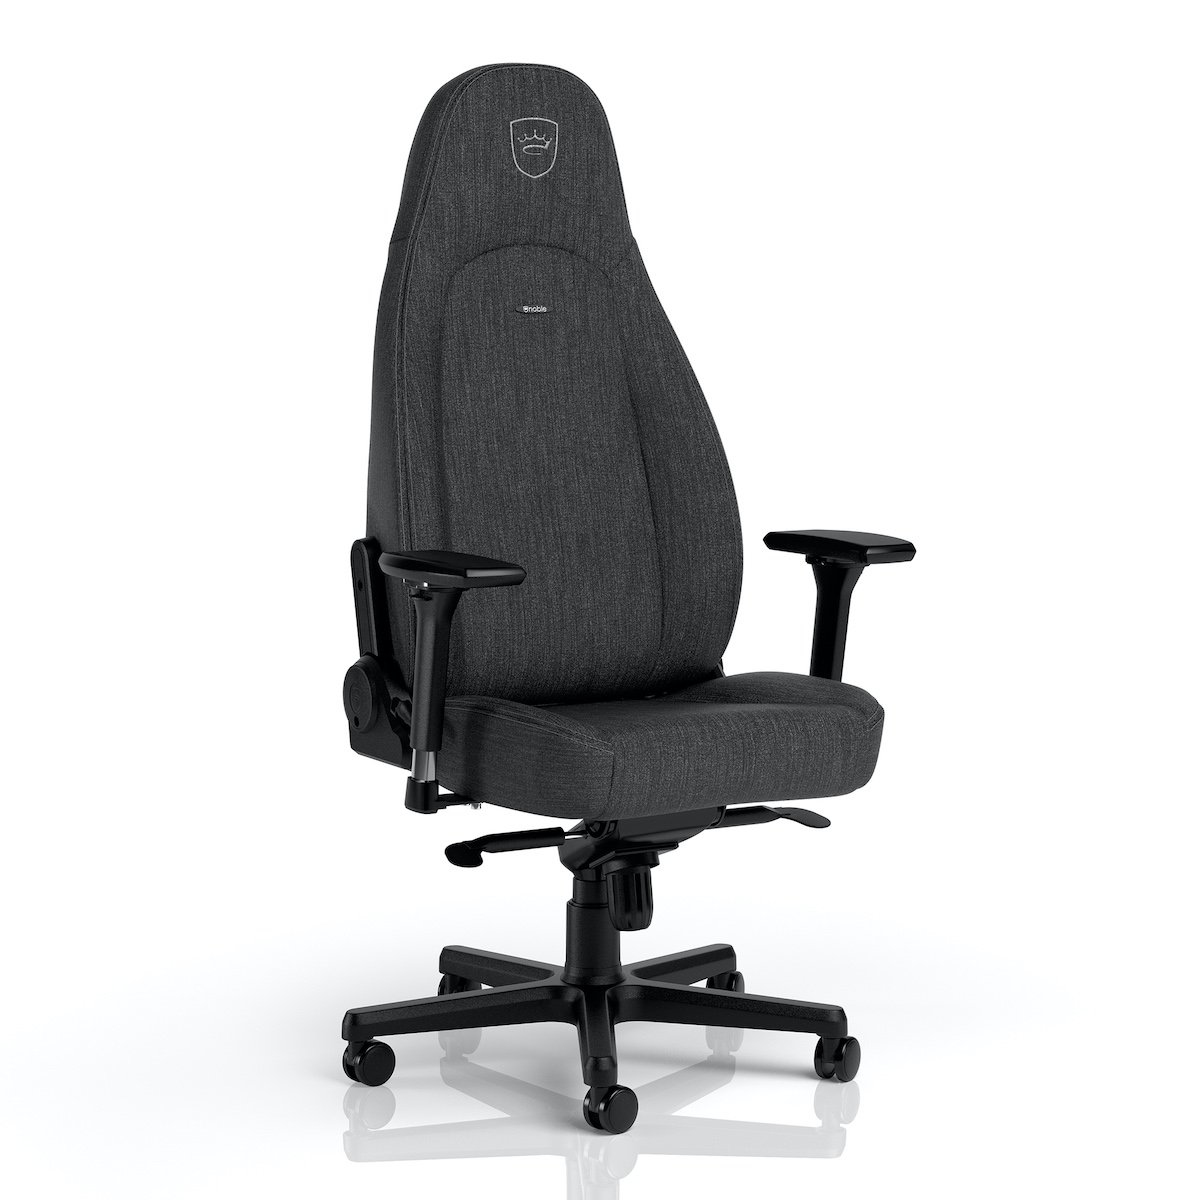 Cadeira noblechairs ICON TX - Fabric Edition Anthracite